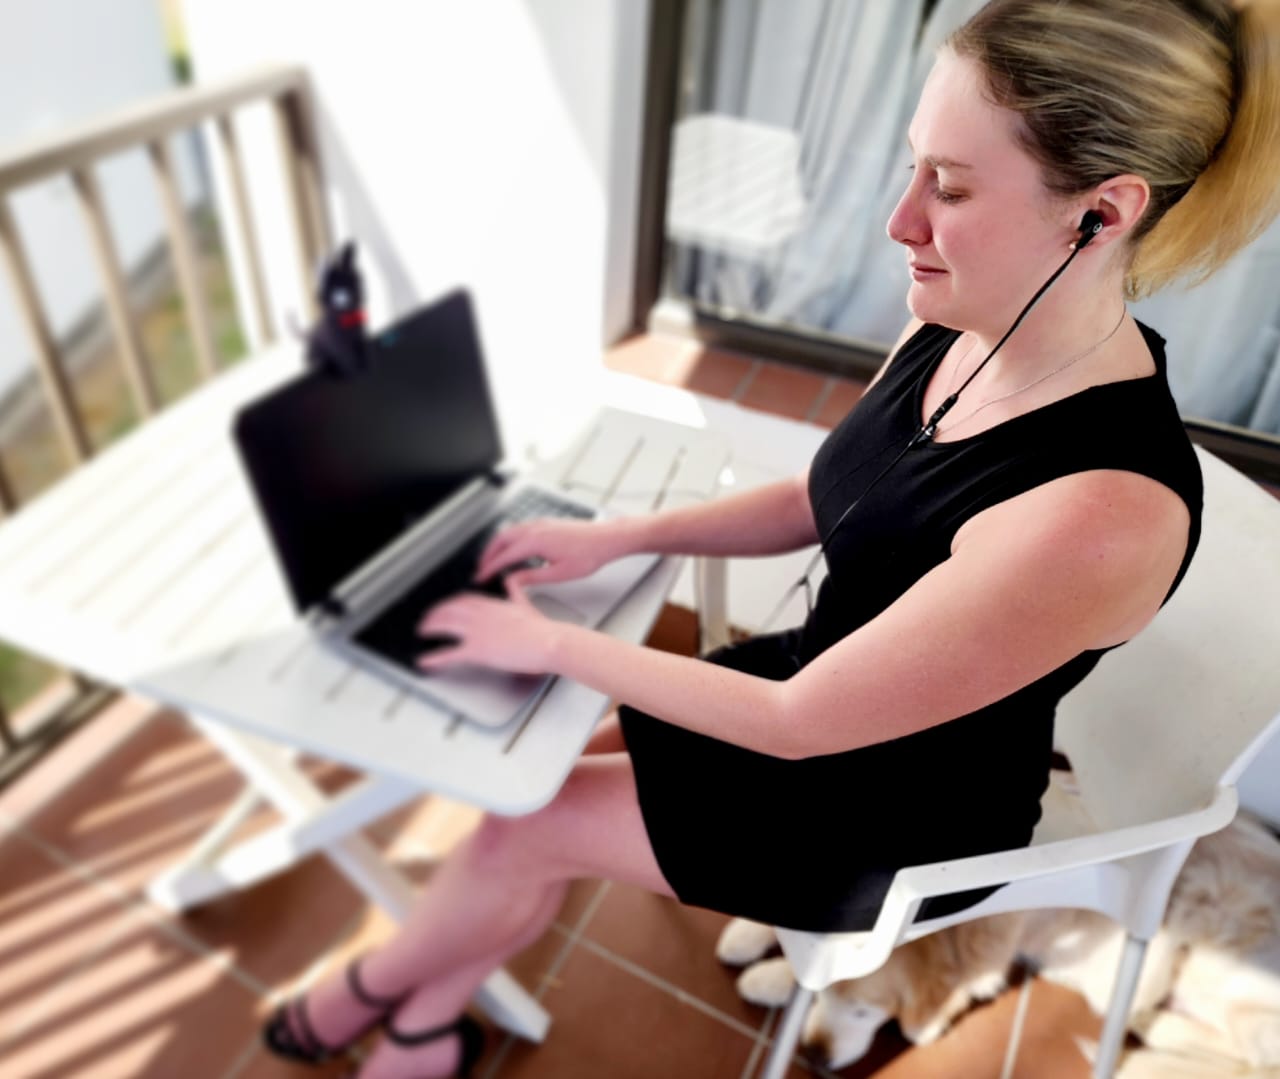 Lilley sits at a table, typing on a laptop with an earphone in one ear. She is wearing a tailored business-like black dress and black high heals, her long blonde hair is worn up in a hair clip, and she is wearing light makeup. There is a black cat plushy sitting on top of her laptop screen, and Lilley's guide dog Teska's face is just poking out from underneath her chair.